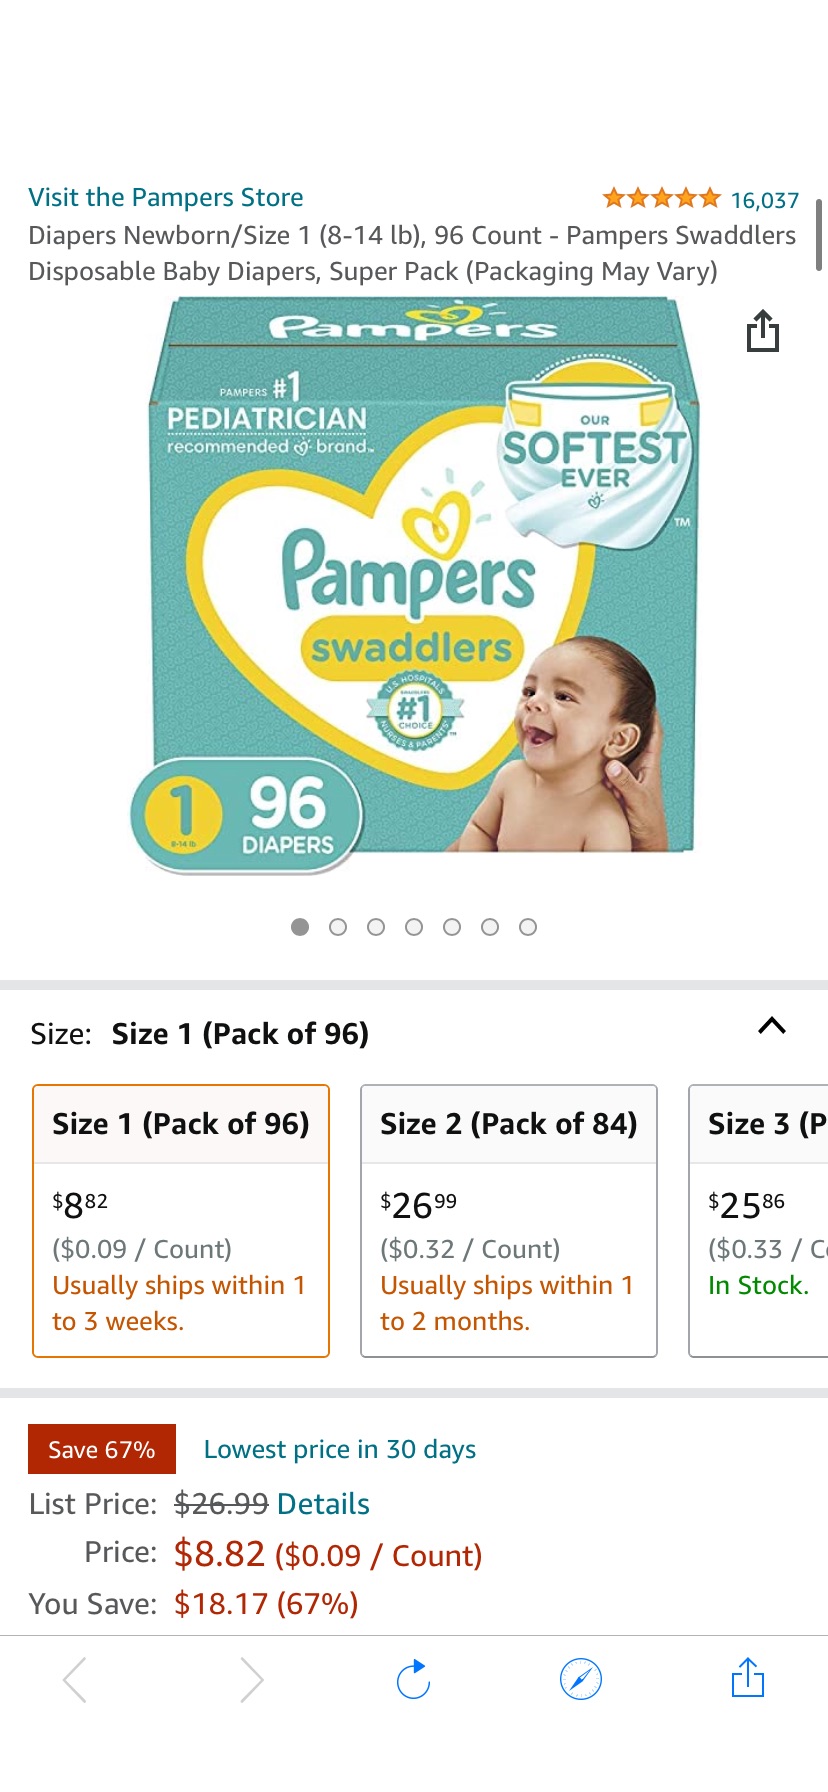 Amazon.com: Diapers Newborn/Size 1 (8-14 lb), 96 Count - Pampers Swaddlers Disposable Baby Diapers, Super Pack (Packaging May Vary) : Everything Else